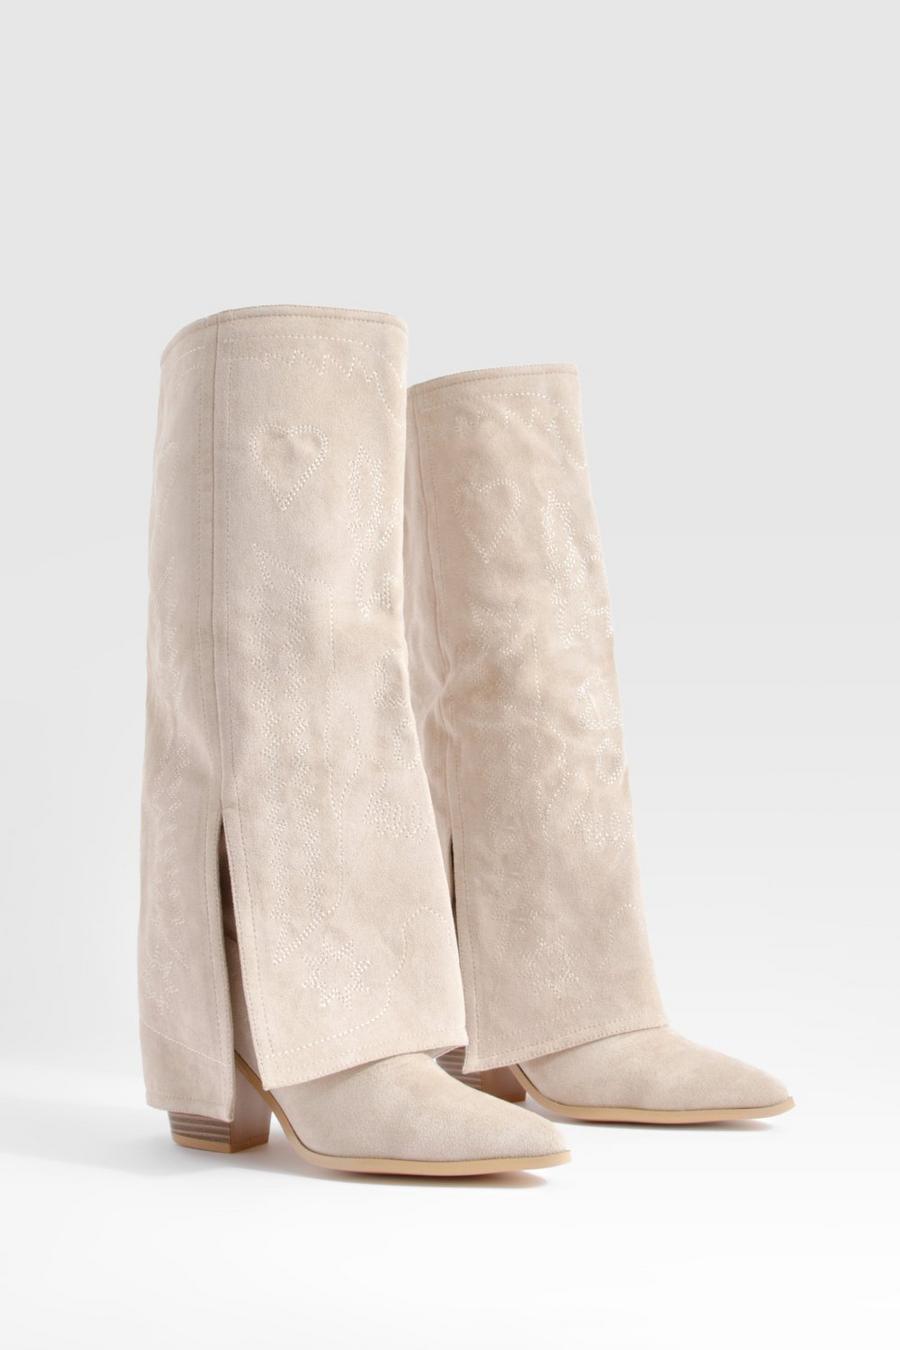 Sand Wide Width Foldover Western Knee High Boots image number 1